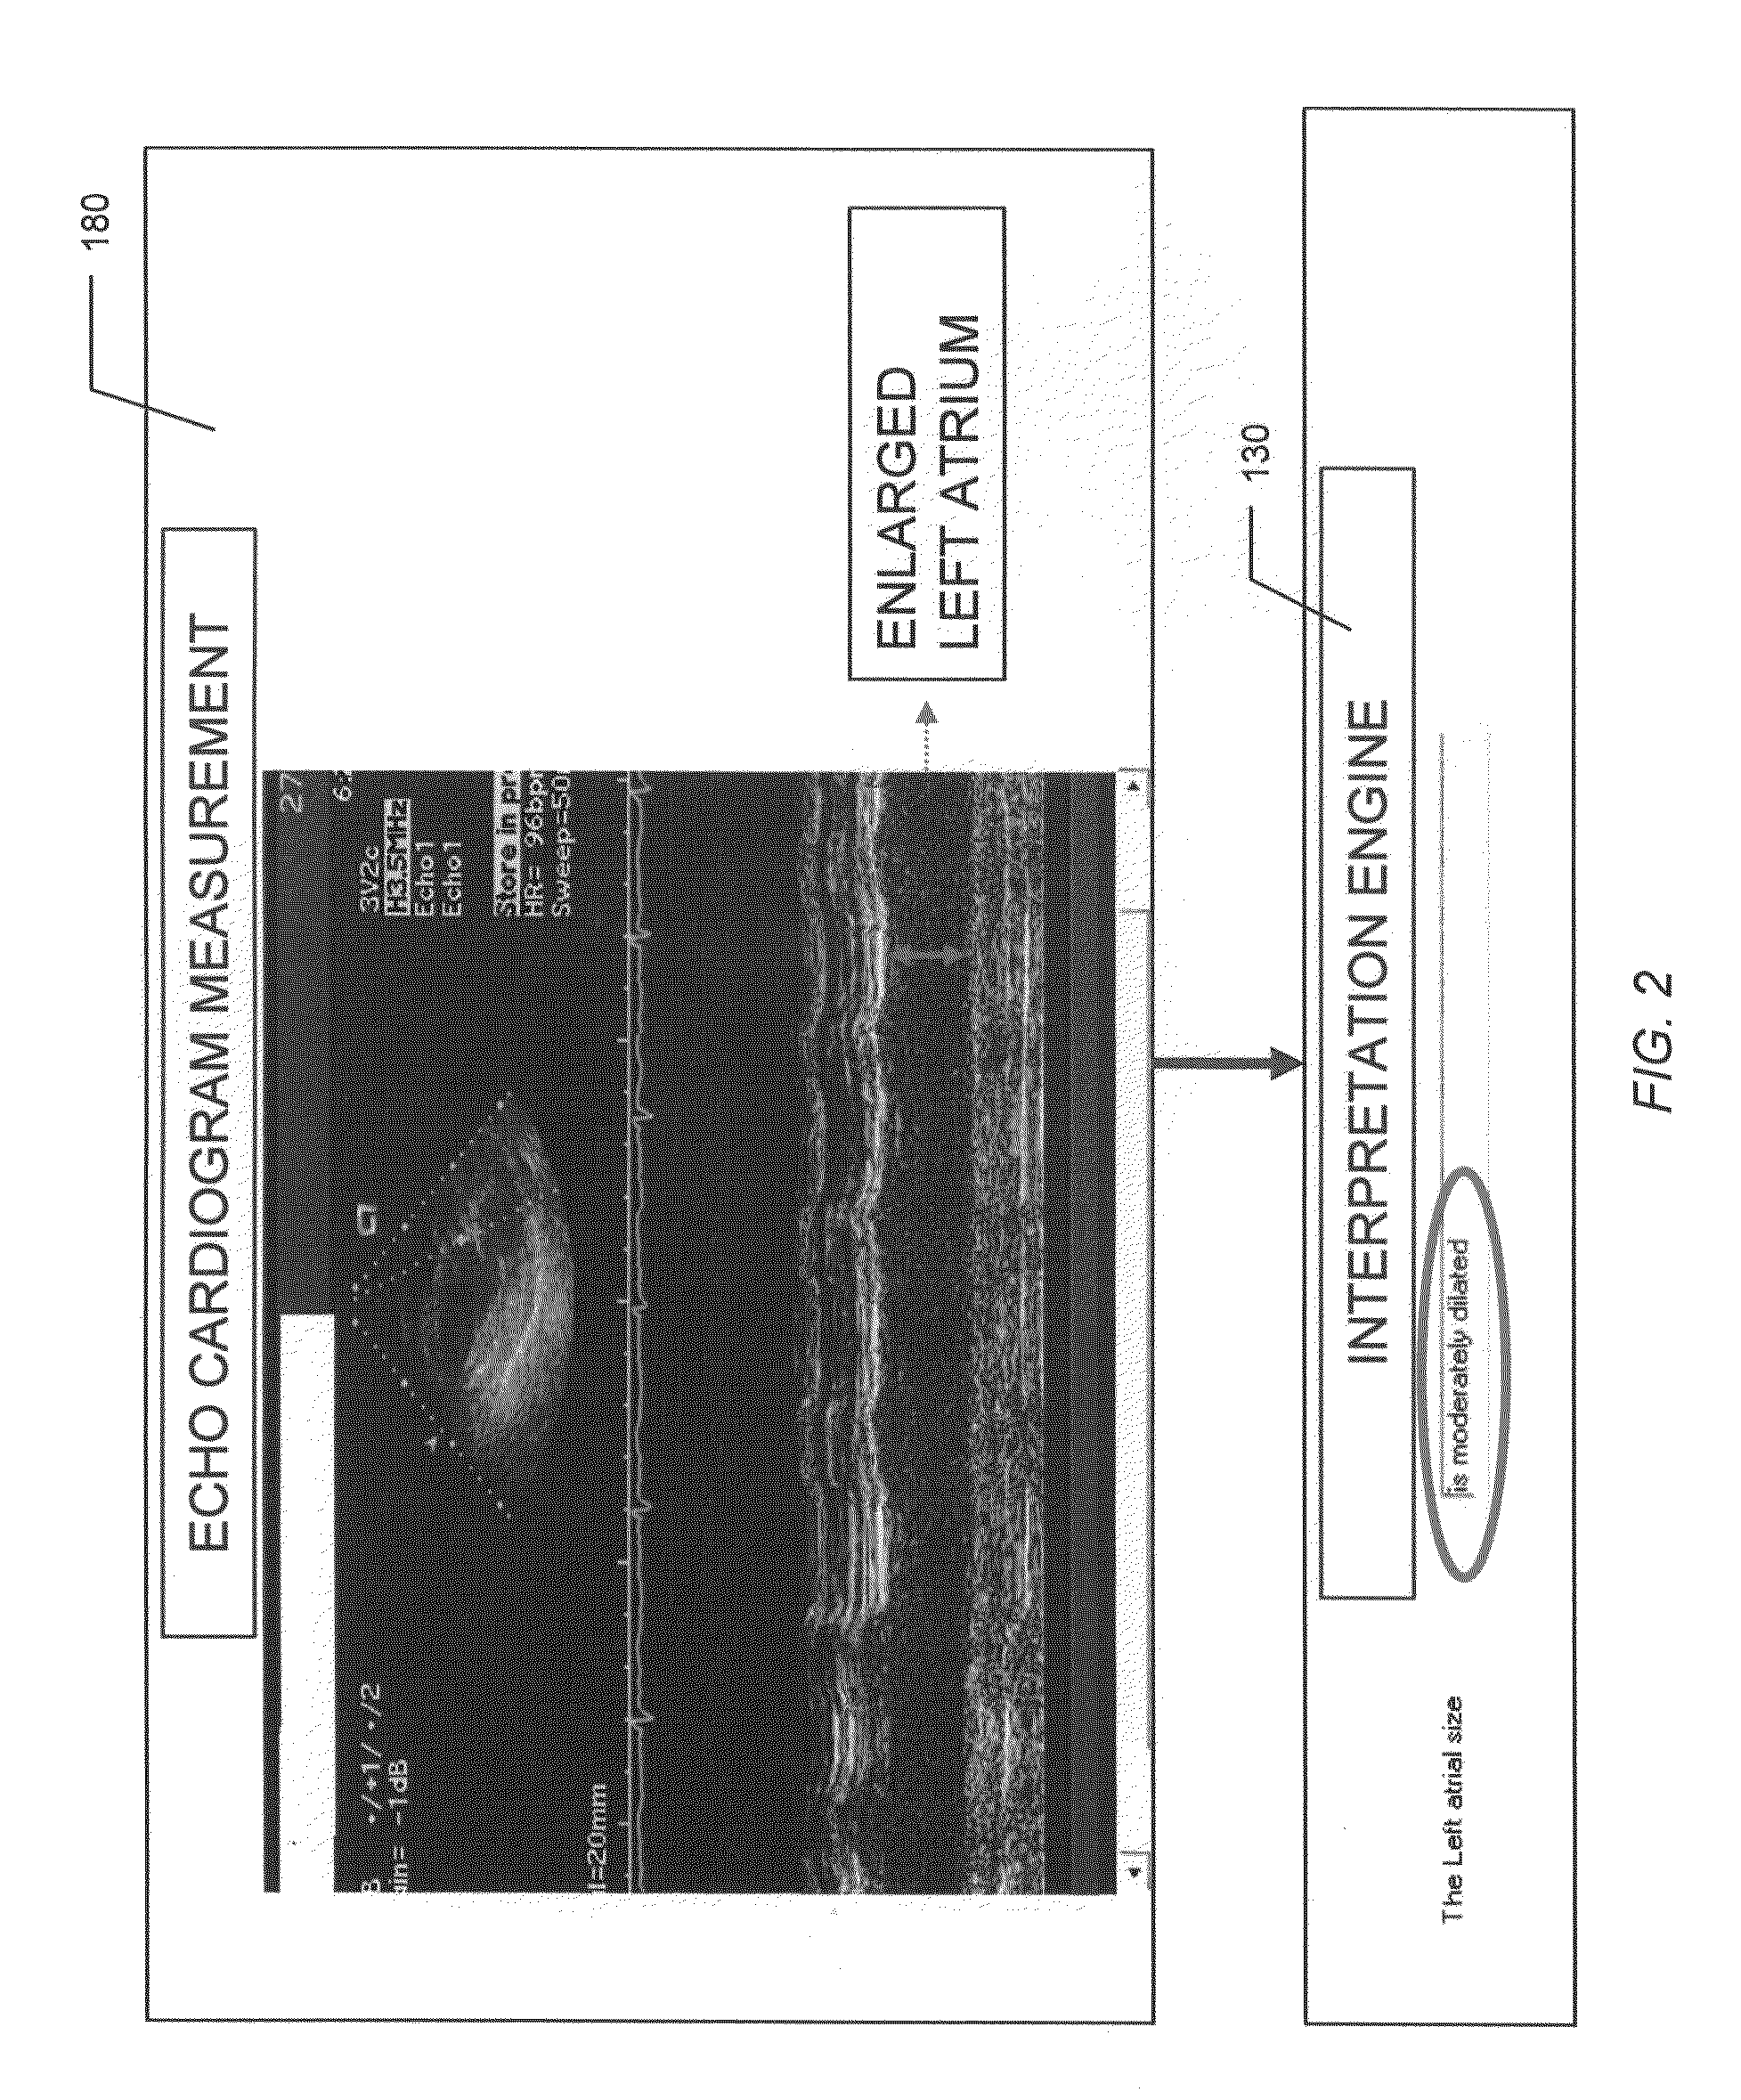 System and Method for Automated Medical Diagnostic Interpretation and Report Generation